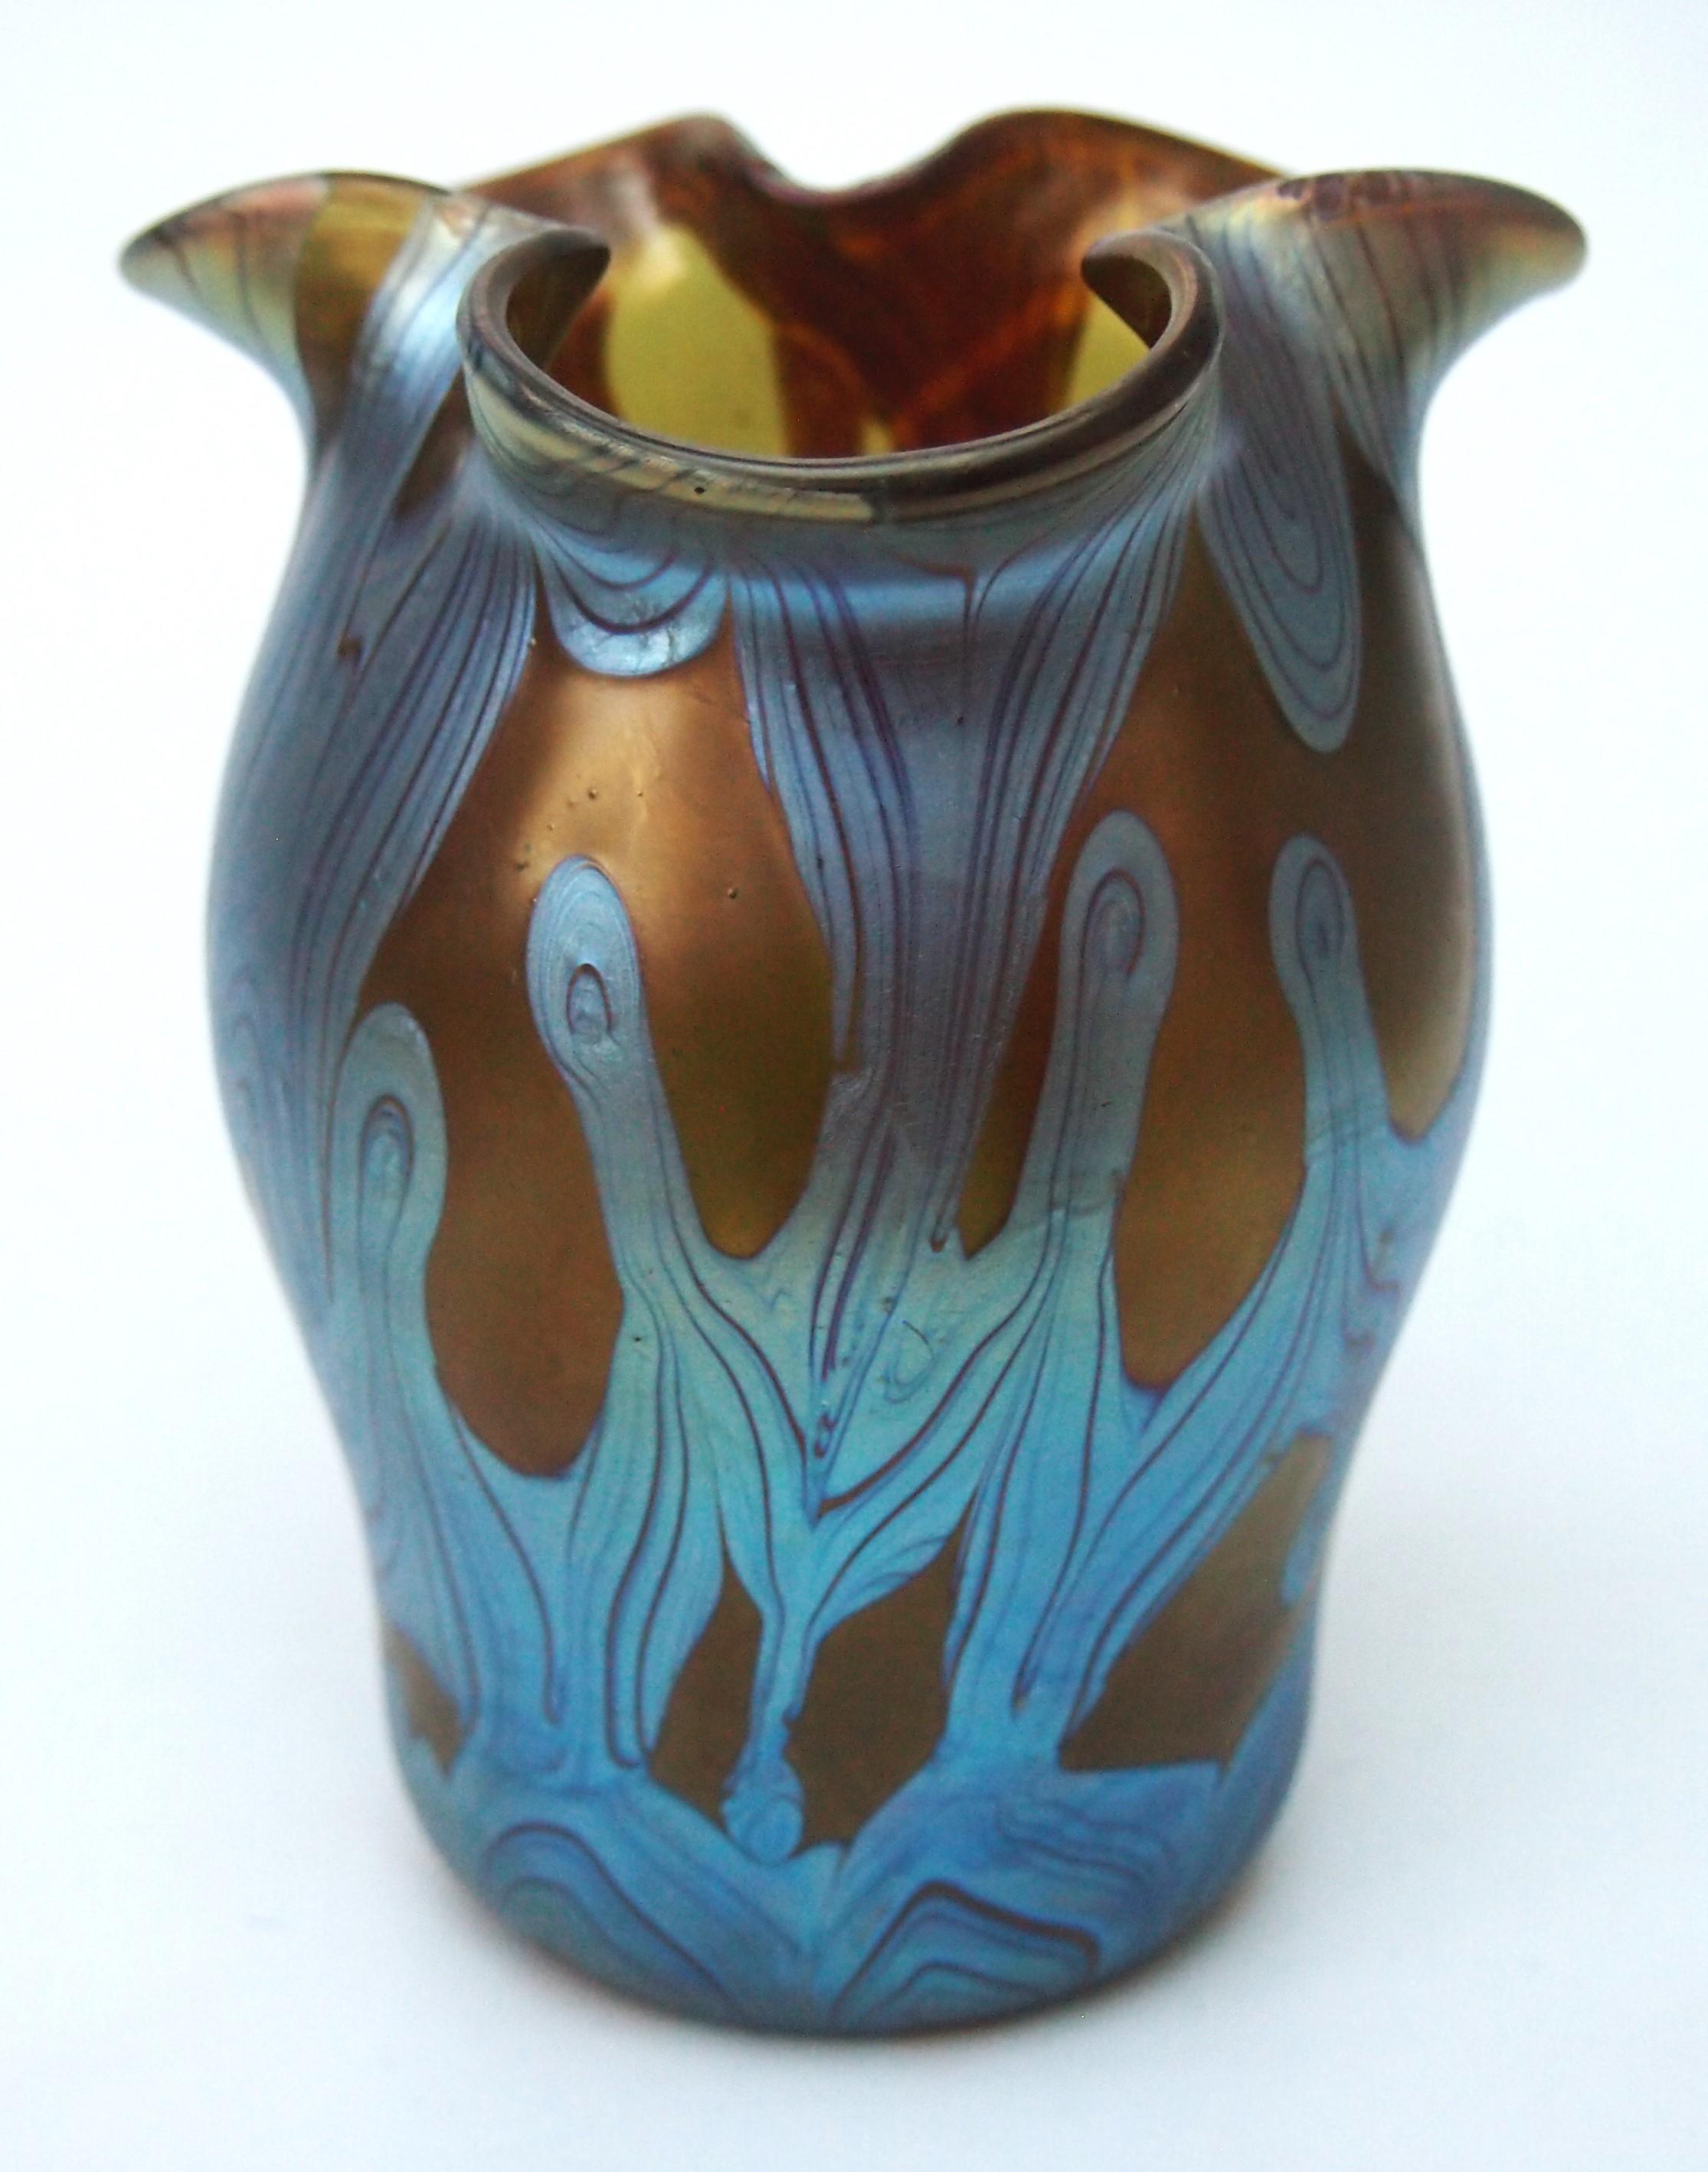 An exceptional and fully documented Loetz Phaenomen Vase. This example is documented as Phaenomen pattern PG 29, the colouring is called bronze and it has blue silver trailing making a window like effect. Amazingly even the shape is fully